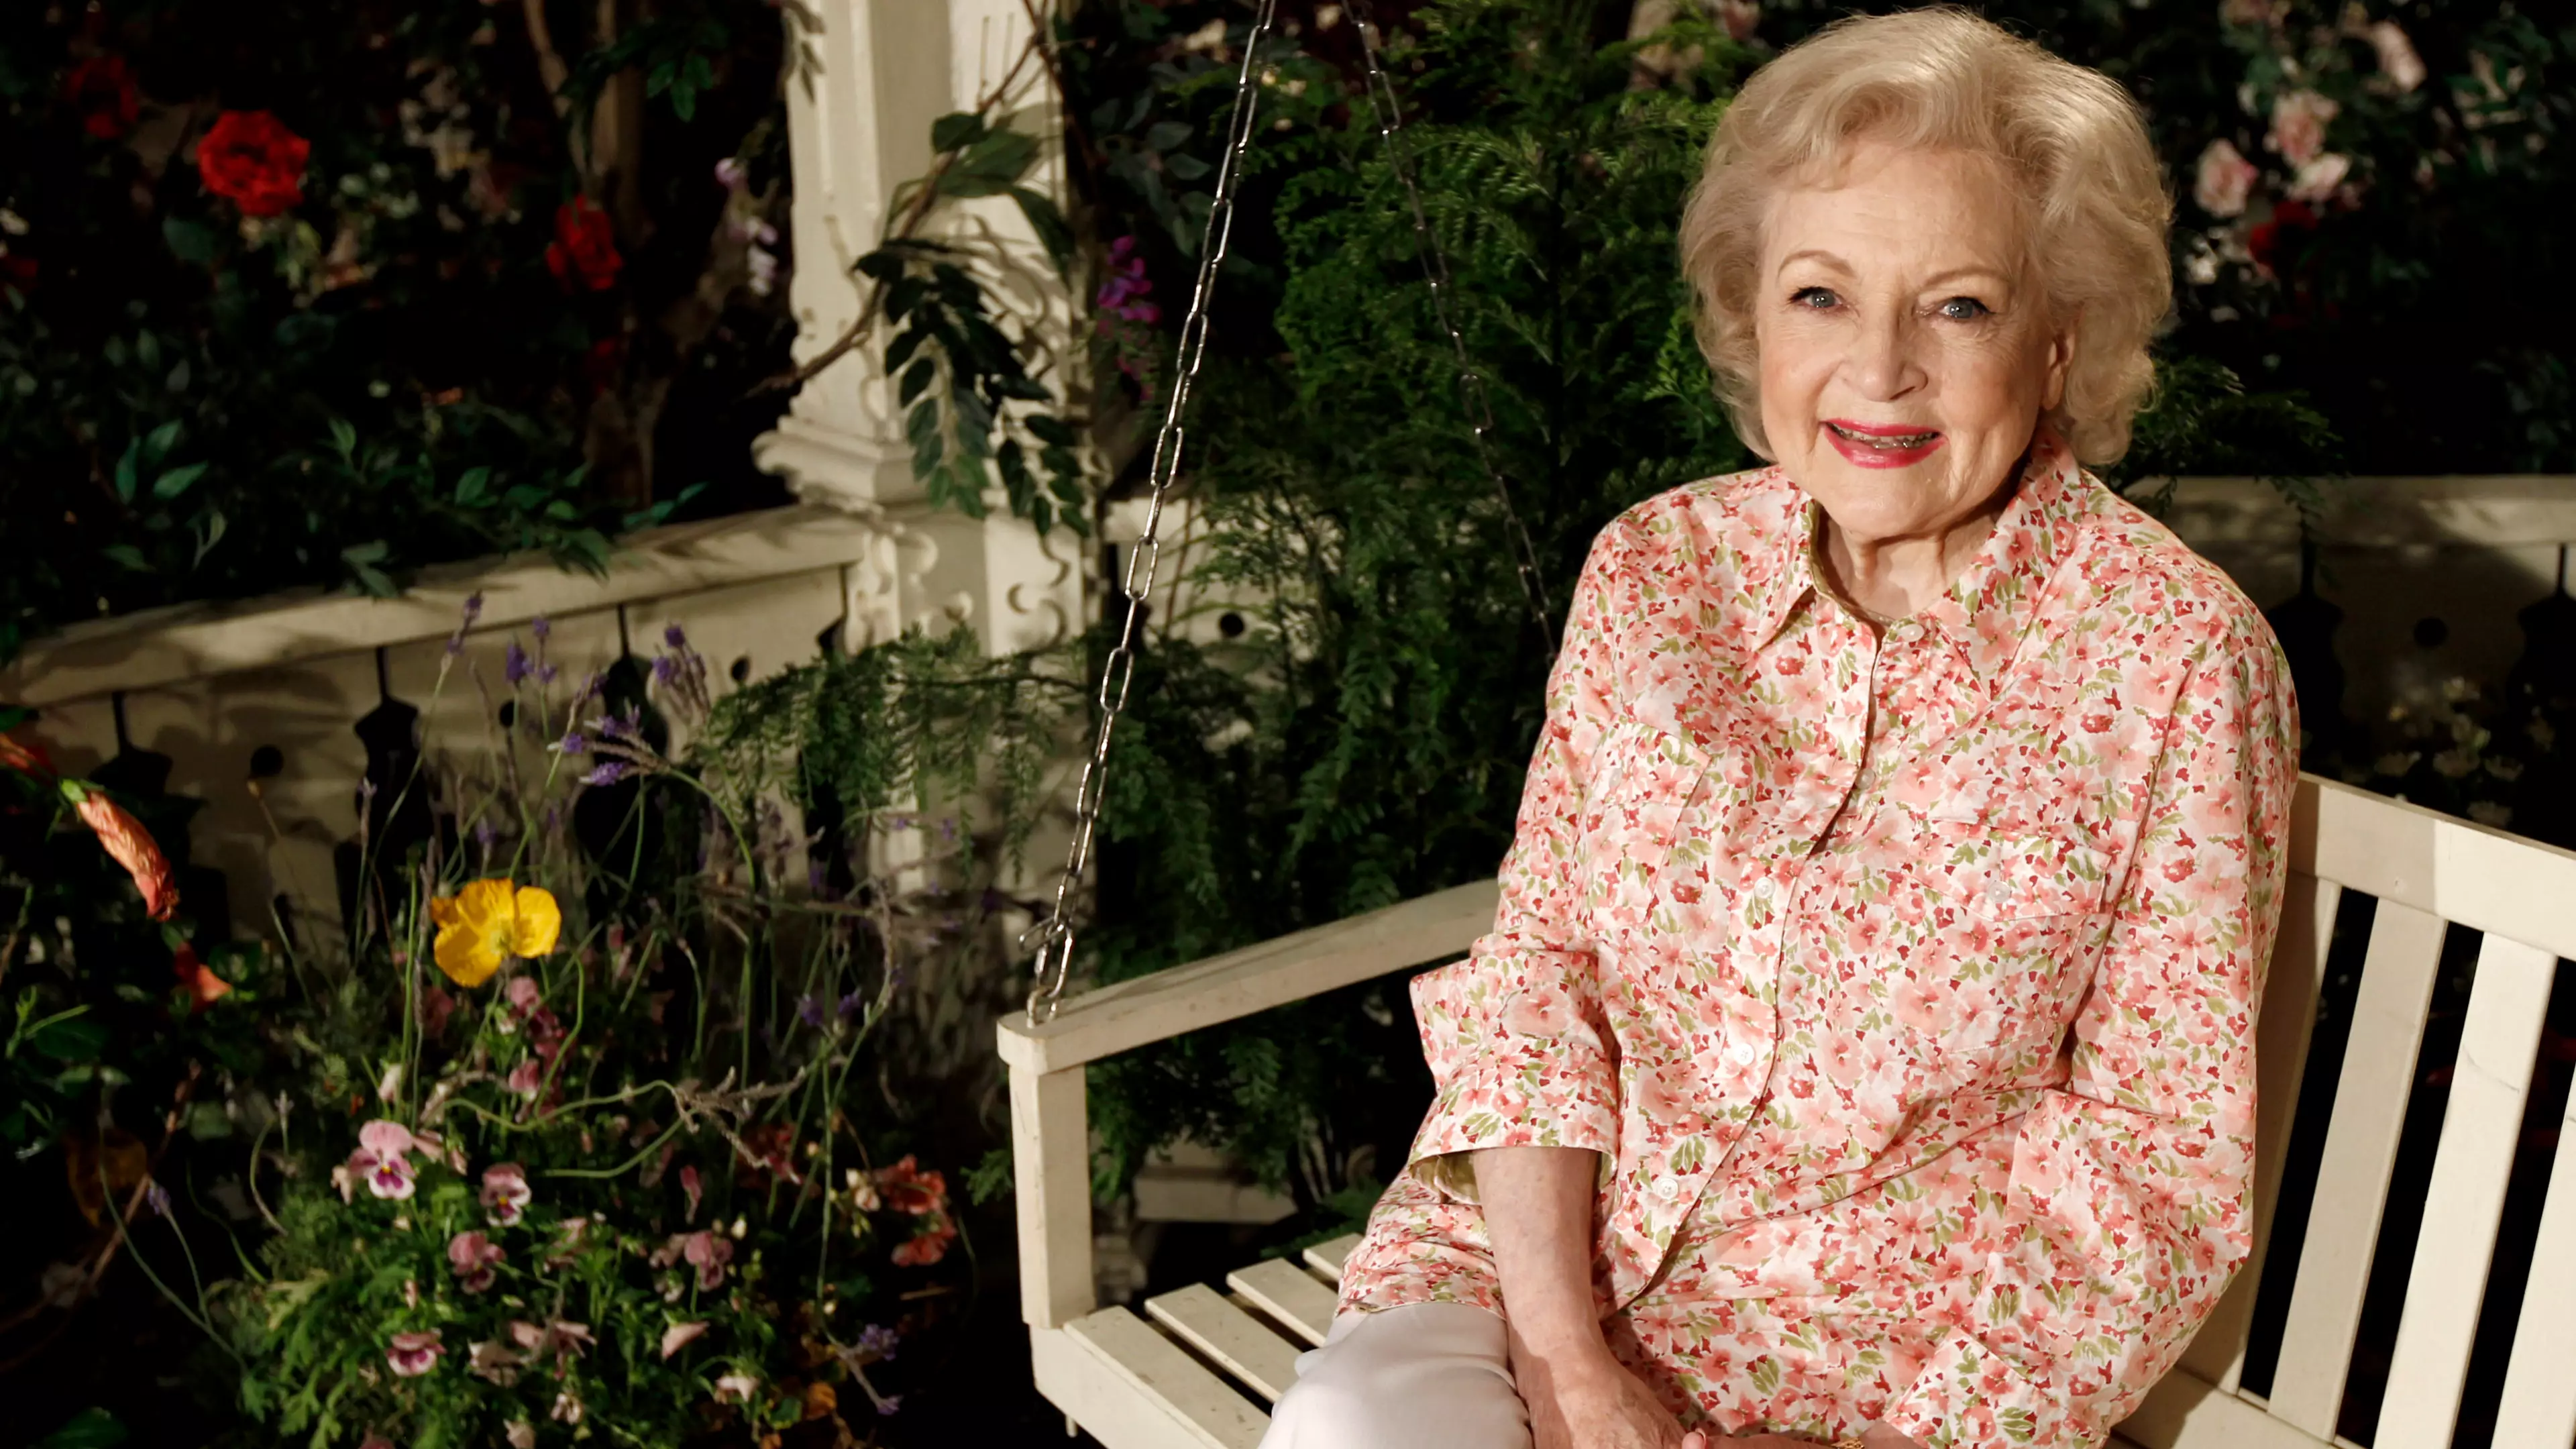 Betty White Says She's 'Blessed With Good Health' As She Turns 99